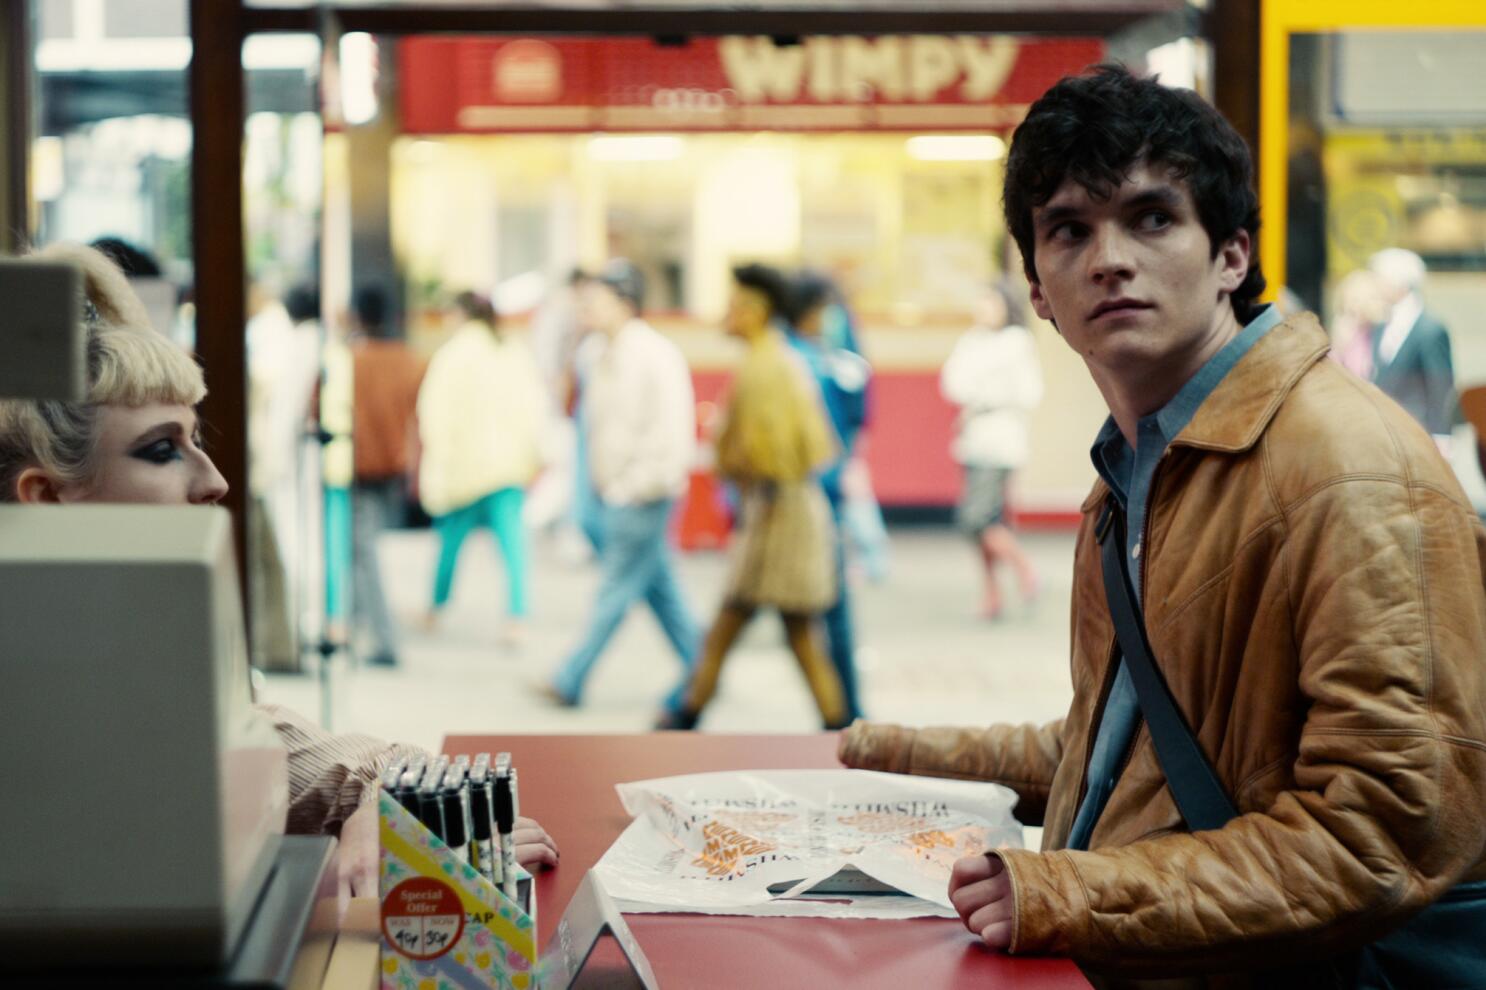 The “Bandersnatch” Episode of “Black Mirror” and the Pitfalls of  Interactive Fiction